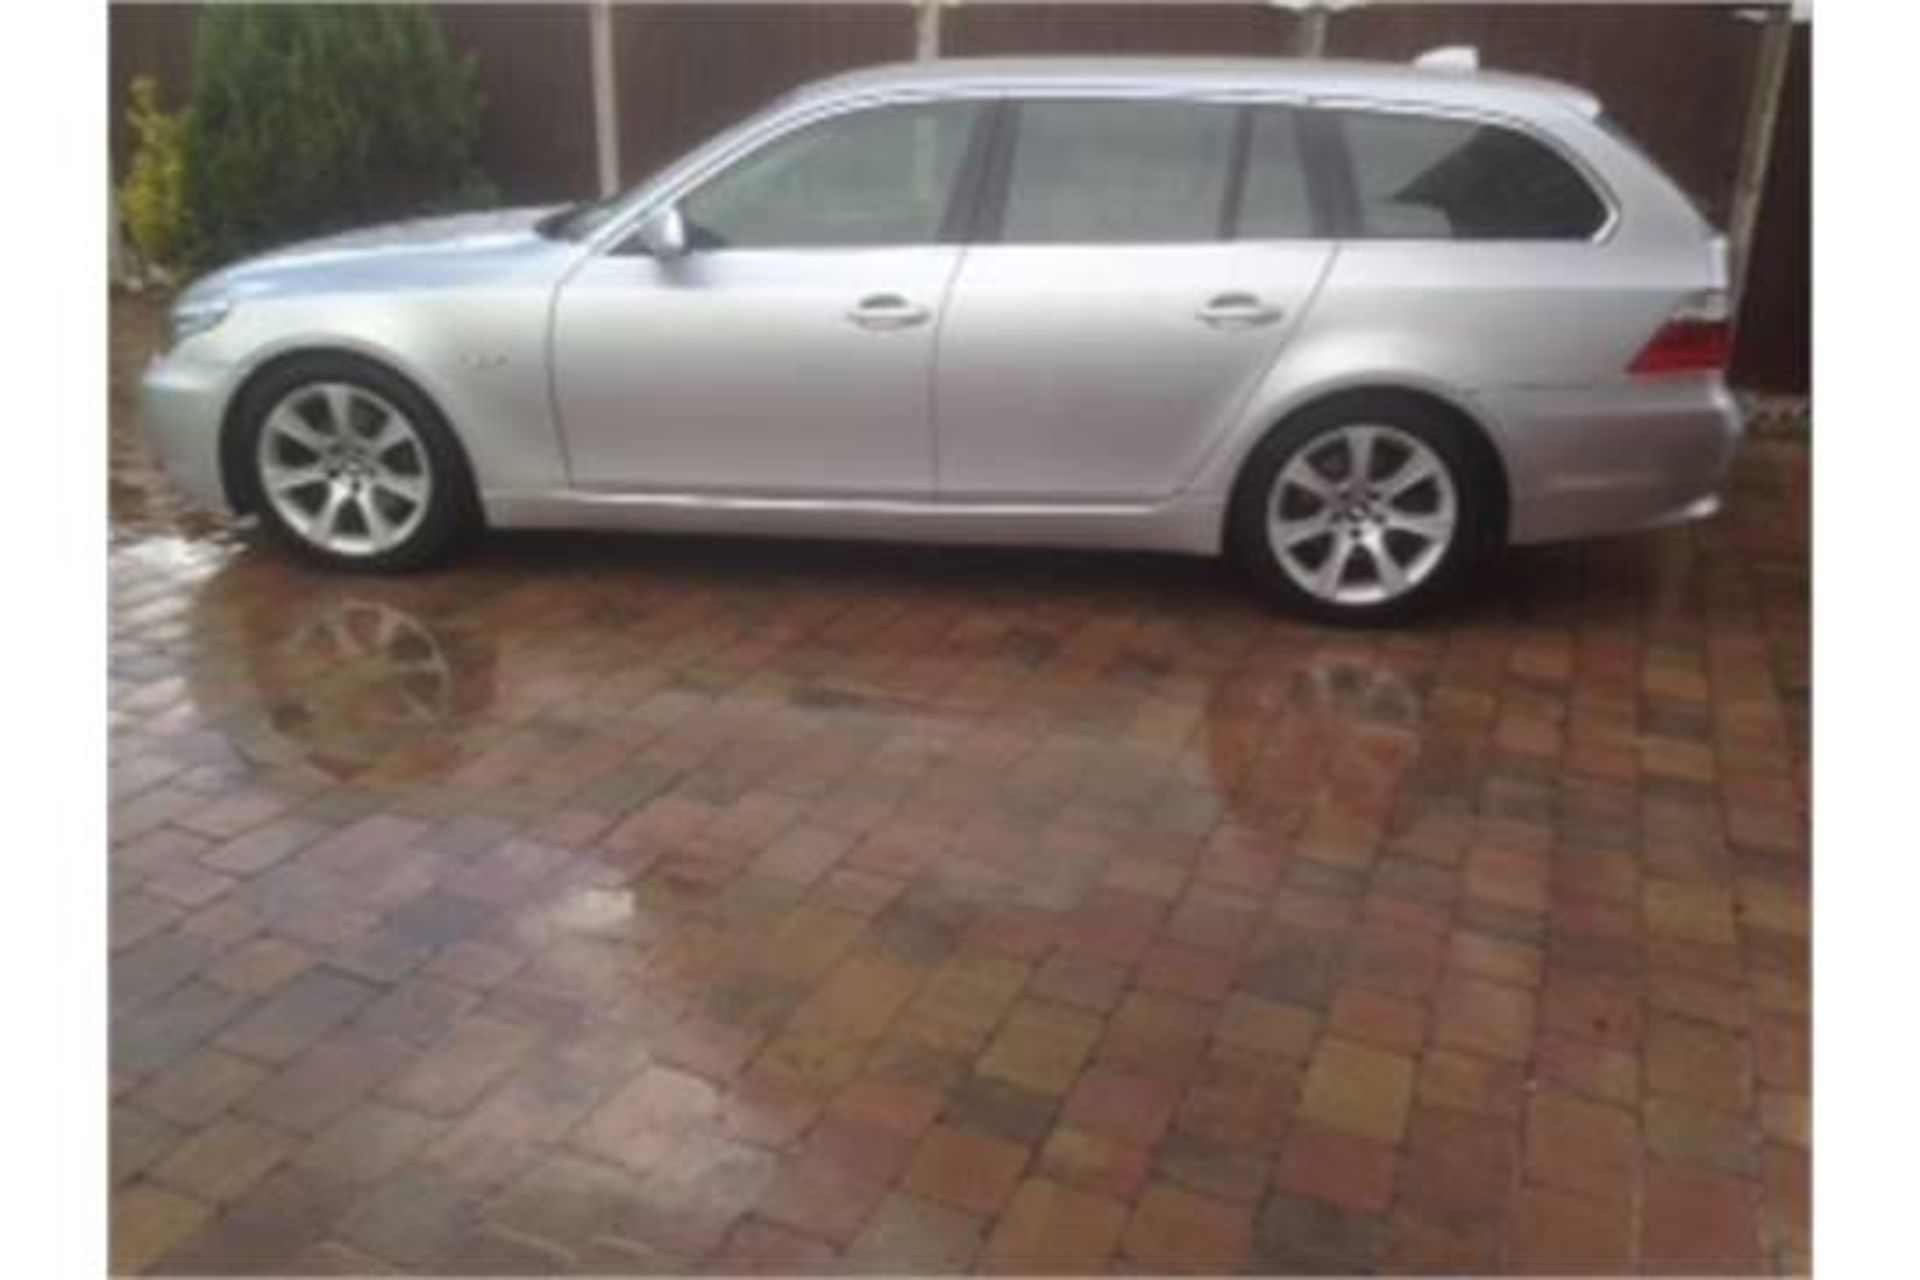 BMW 5 SERIES TOURING 530D, BX58 PNN, 3.0L TD 6 SPEED, DIESEL, AUTOMATIC I DRIVE, 5 DOOR, 95,000 - Image 6 of 10